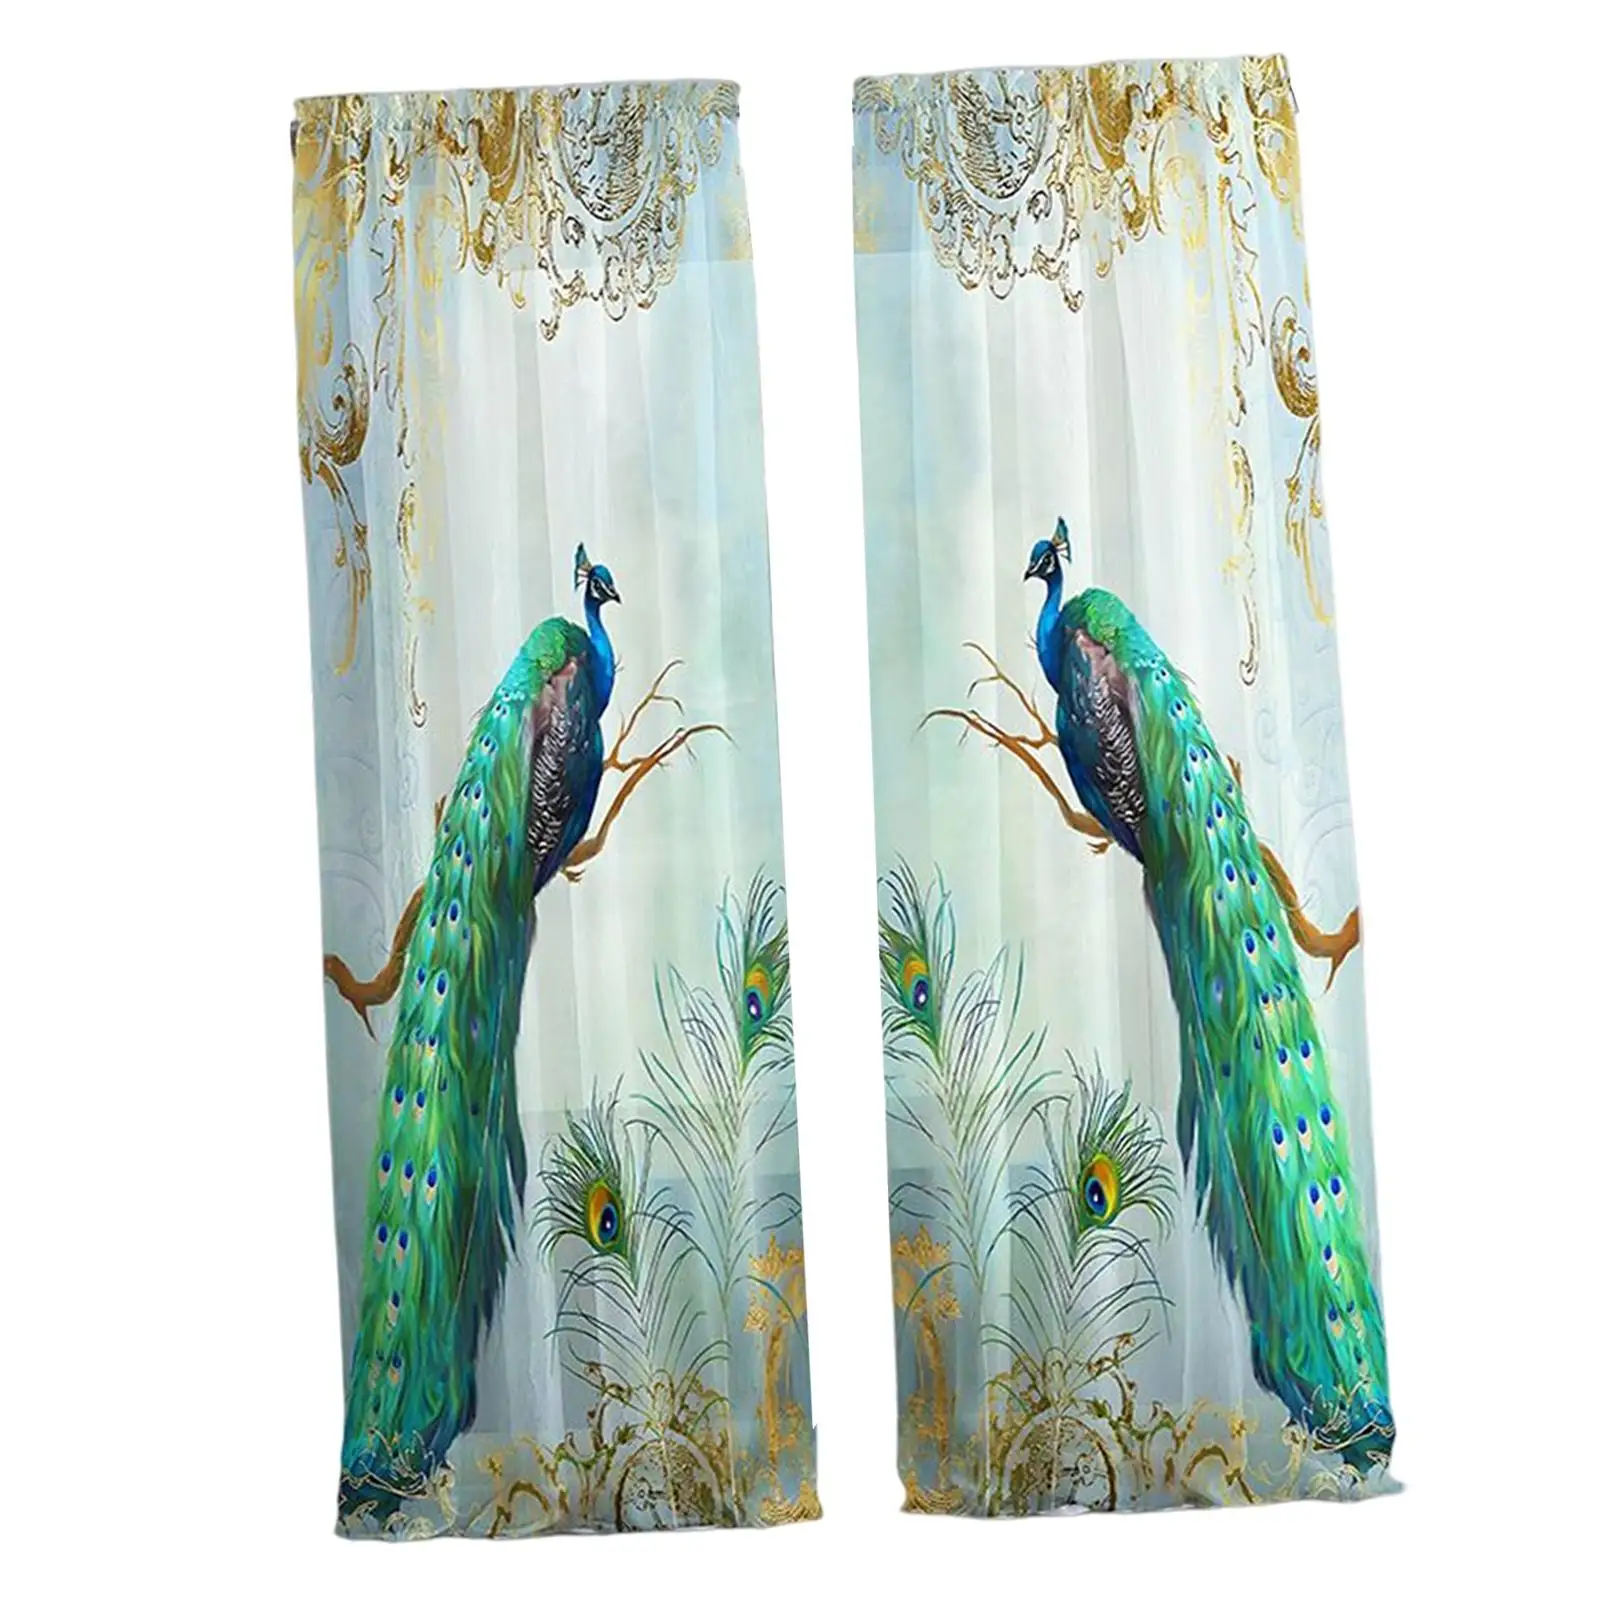 Peacock Window Curtains Privacy Drapes Panels Farmhouse Luxurious Rustic Rod Pocket Curtains for Patio Living Room 2 Drapes